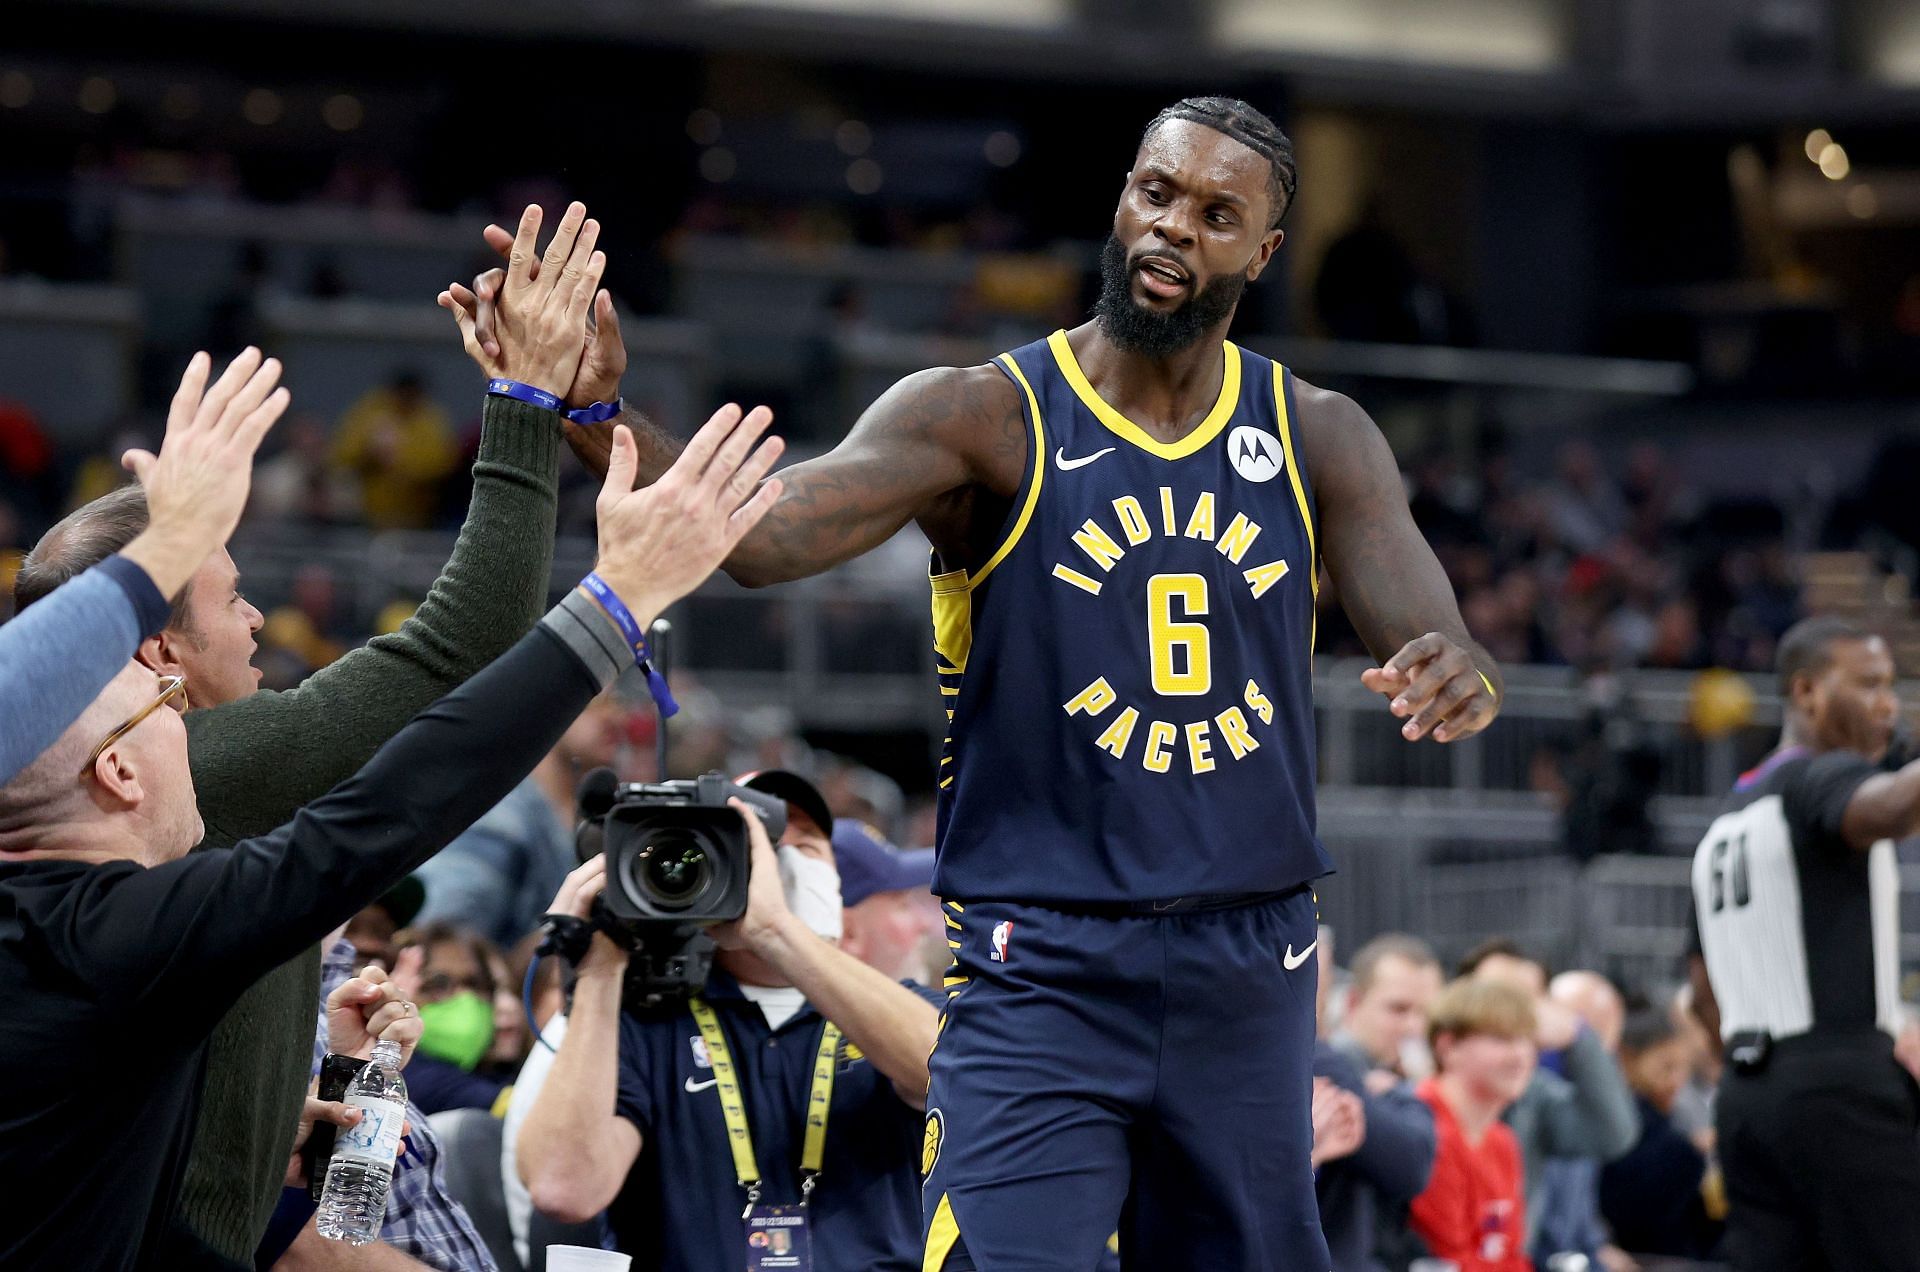 Lance Stephenson will continue his stay with the Indiana Pacers.